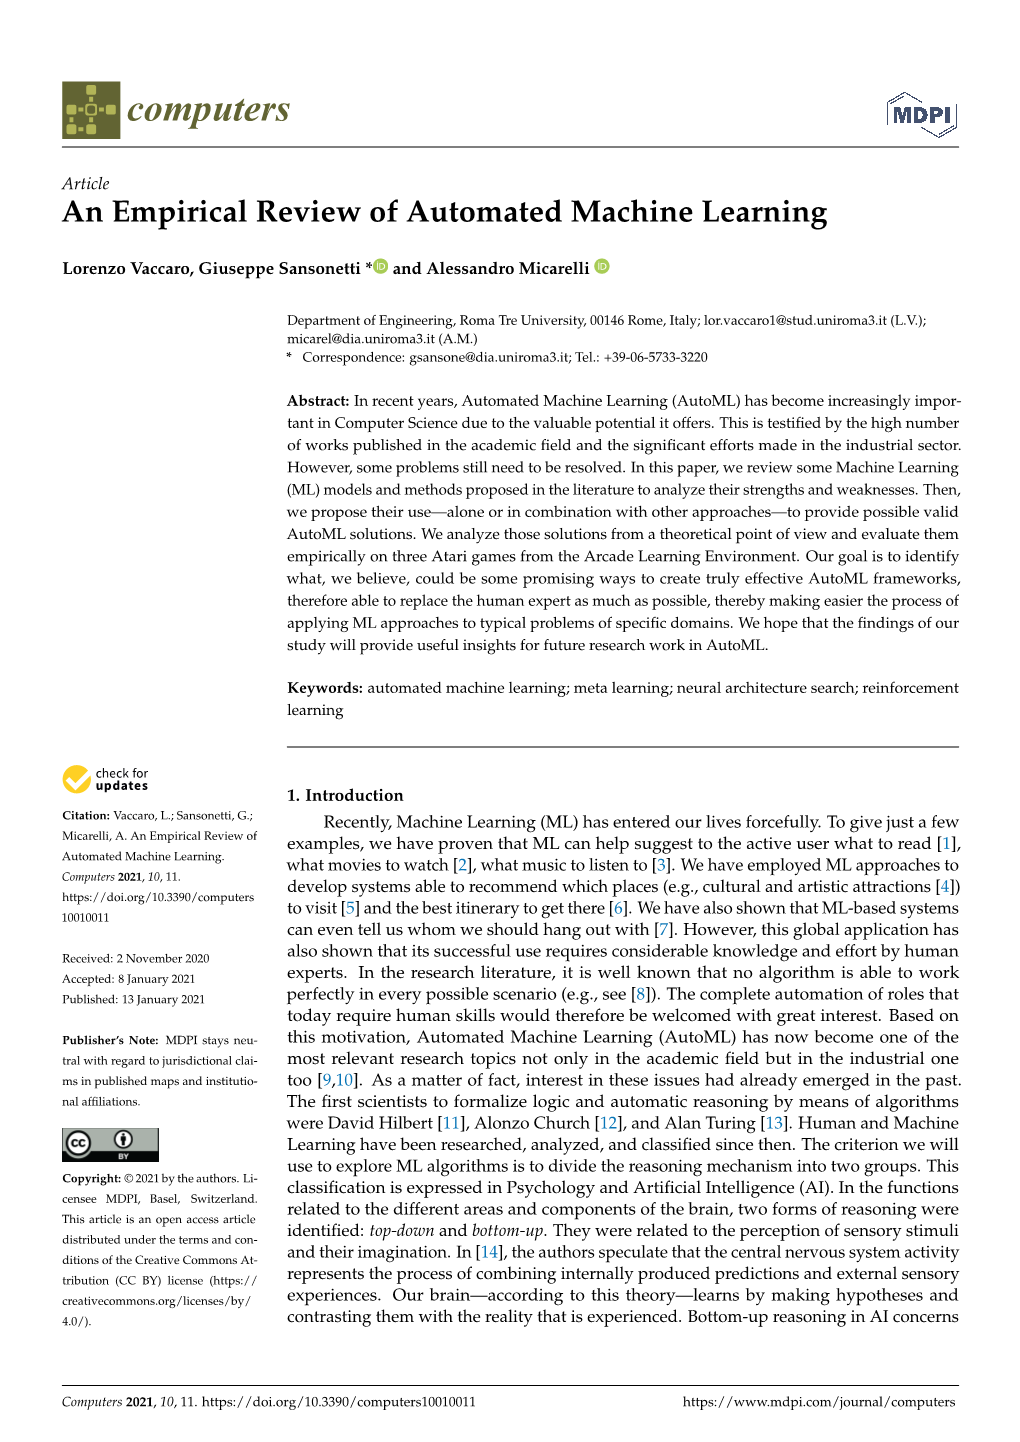 An Empirical Review of Automated Machine Learning